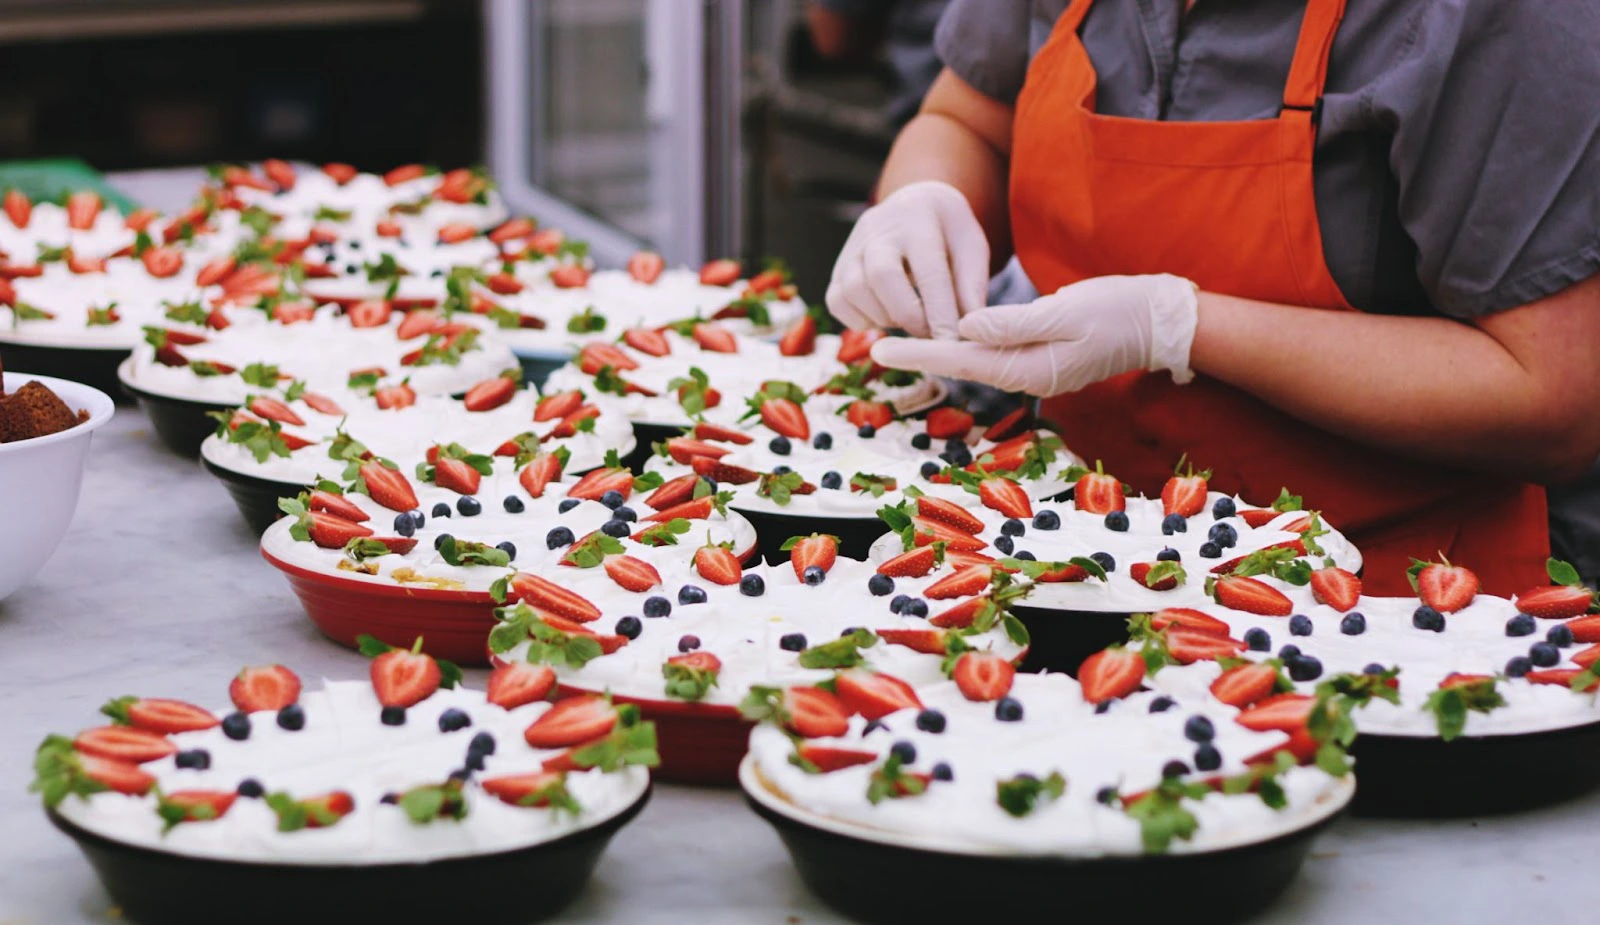 Pastry chef preparing dishes with whipped cream, strawberries, and blueberries